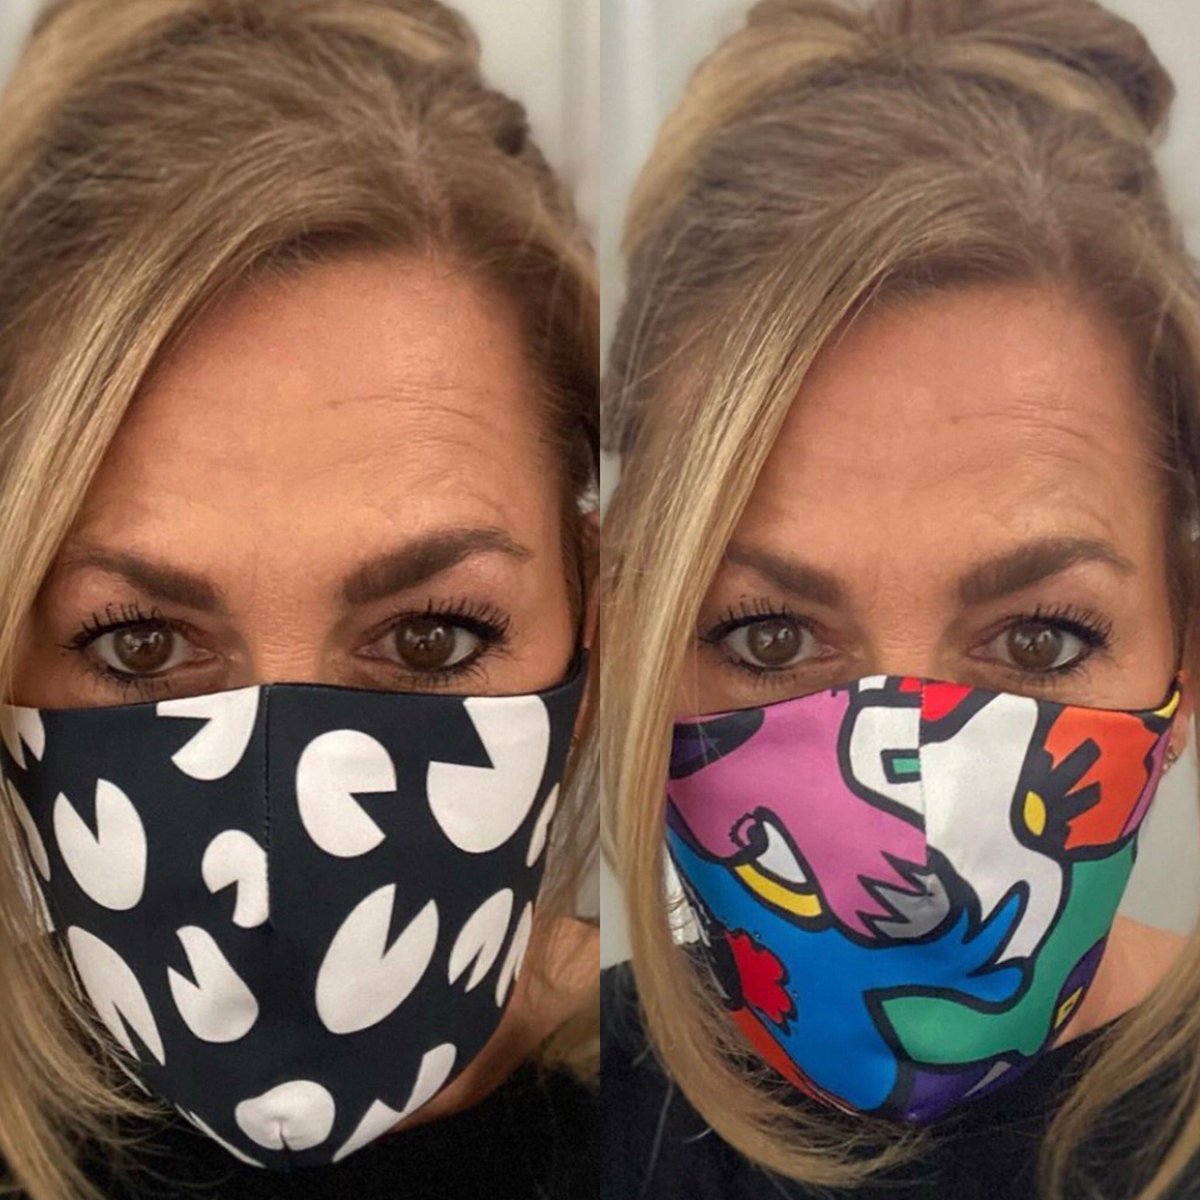 We think these are our best #masks yet!!! So much fun working with @eats_everything, @EdibleRecords and @NicolasDixonart on these. Trying to put a #smile on everyone’s #faces . #faceart #art #abstractart #pacman #eatseverything #facemasks #facemasksforsale #clubbers #clubbing